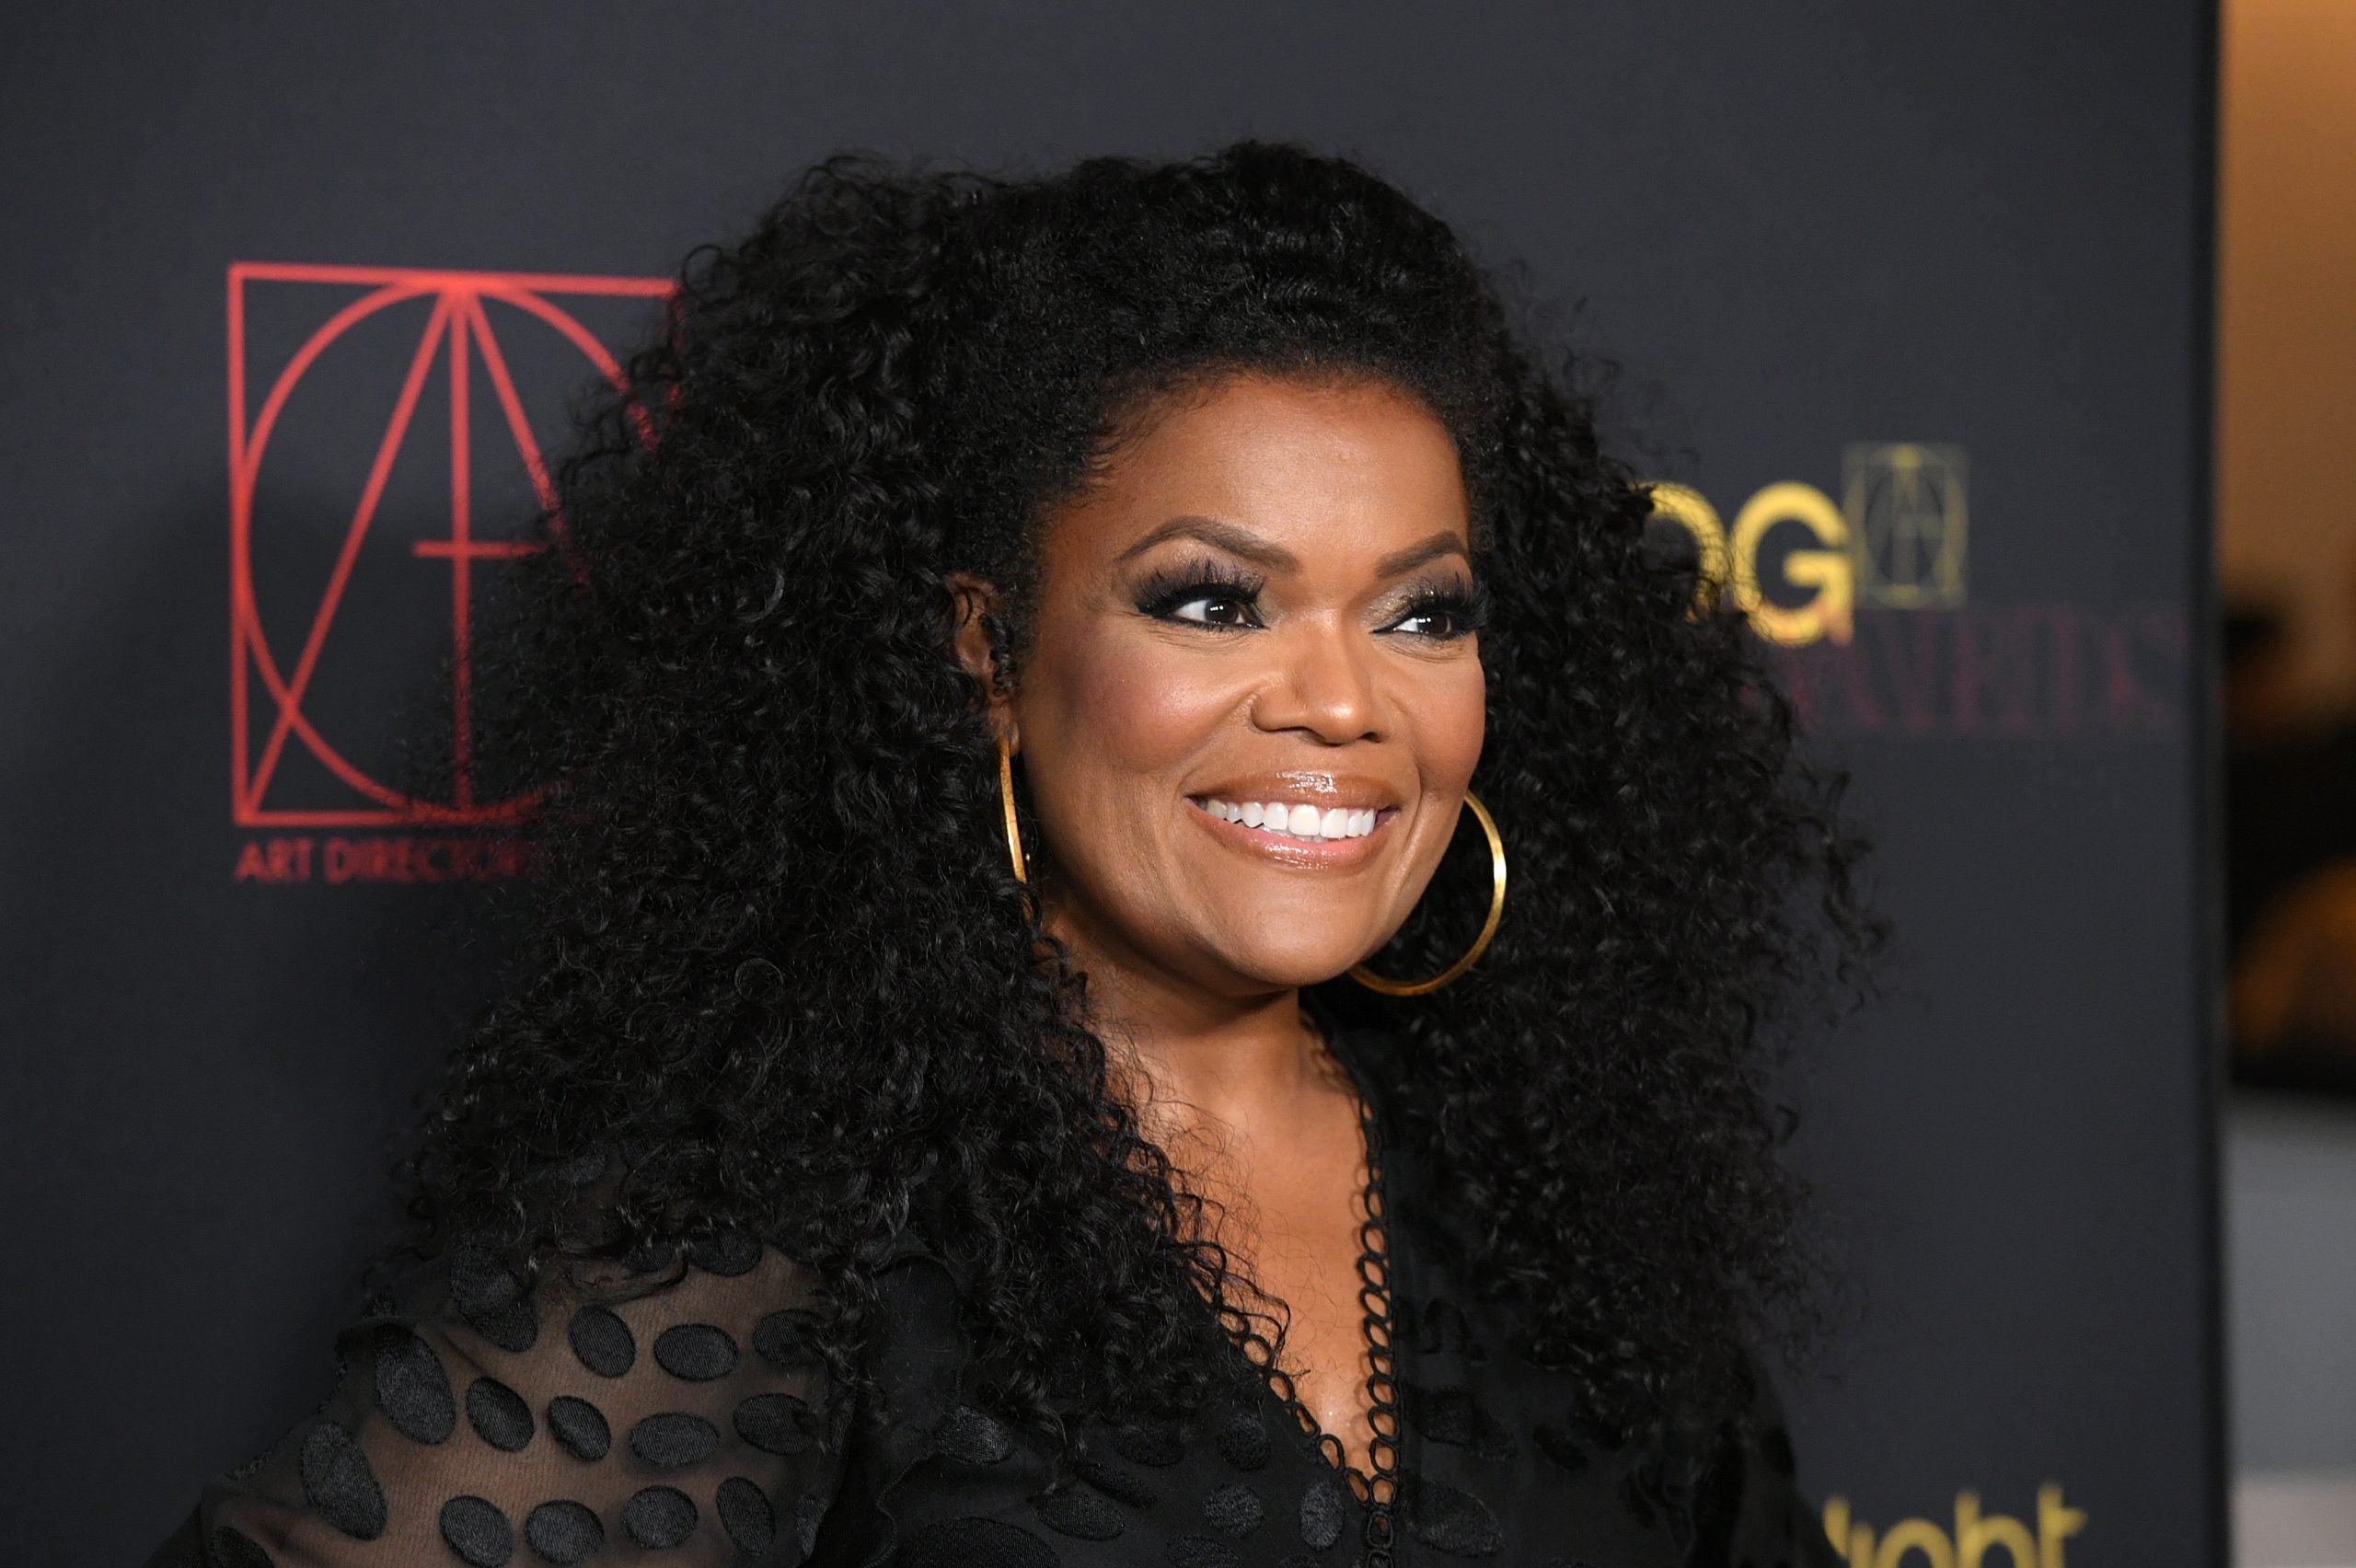 Yvette Nicole Brown Sees "Act Your Age" As The New "Golden Girls"